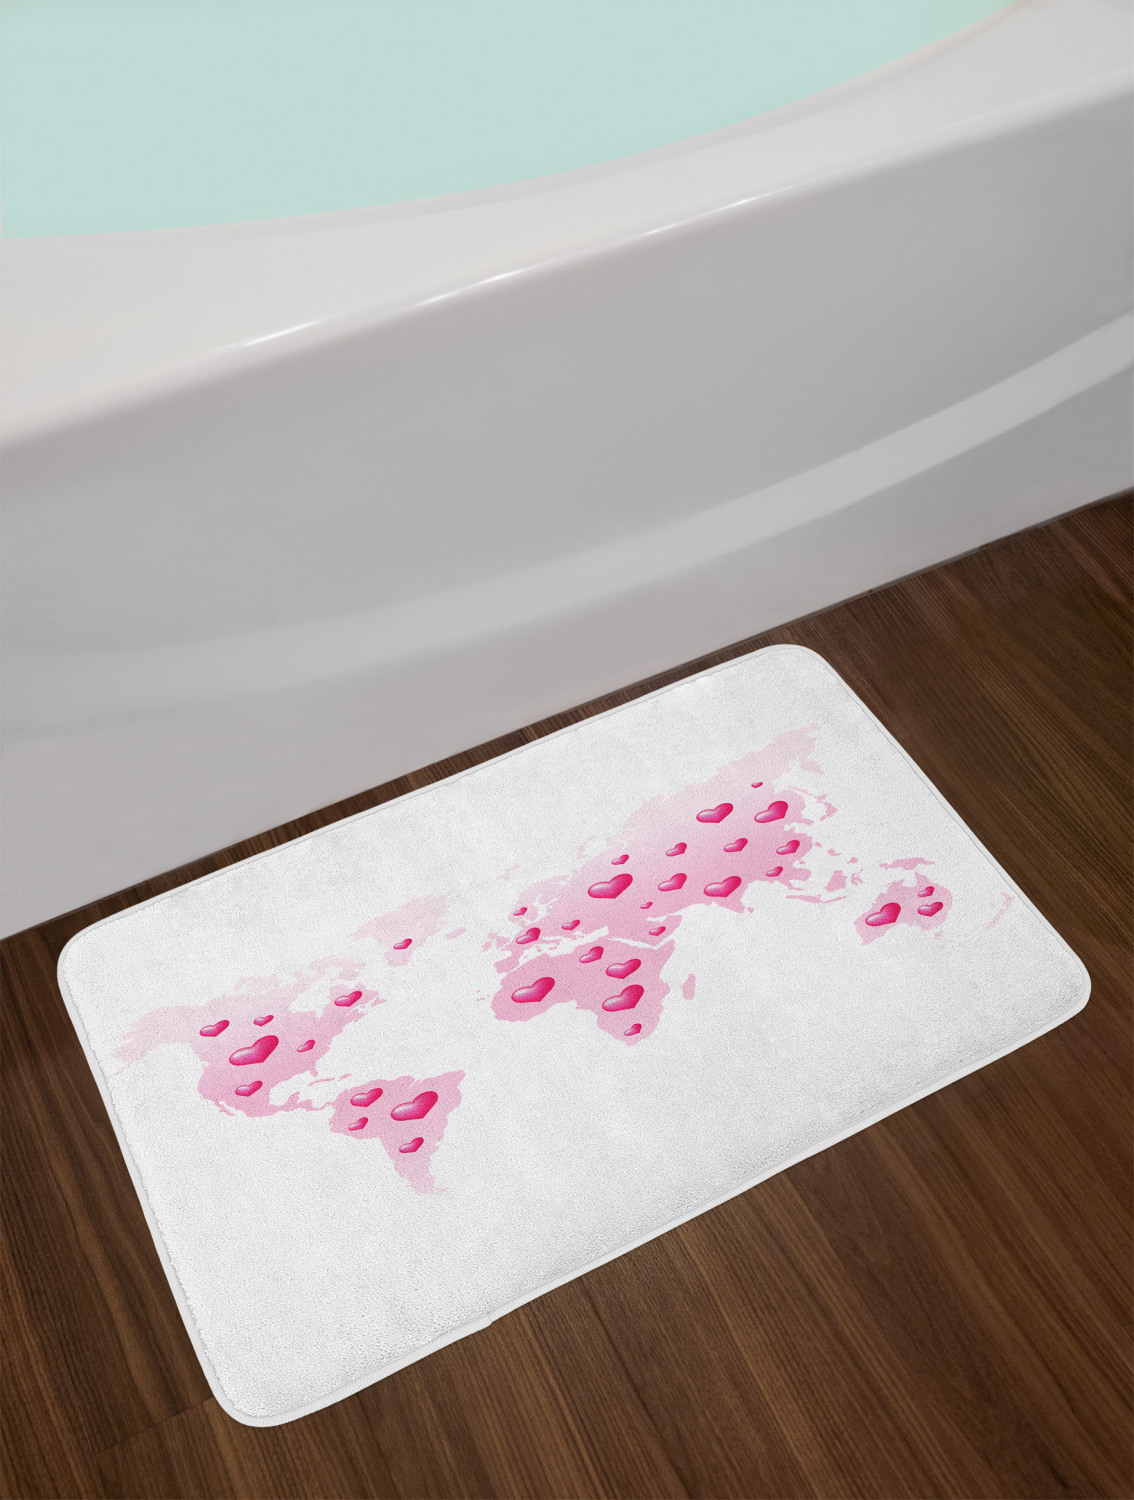 Princess Bath Mat, Global Peace Theme World Map Dotted With Hearts Love Planet Earth, Non-Slip Plush Mat Bathroom Kitchen Laundry Room Decor, 29.5 X 17.5 Inches, Baby Pink White Fuchsia, Ambesonne - image 2 of 2